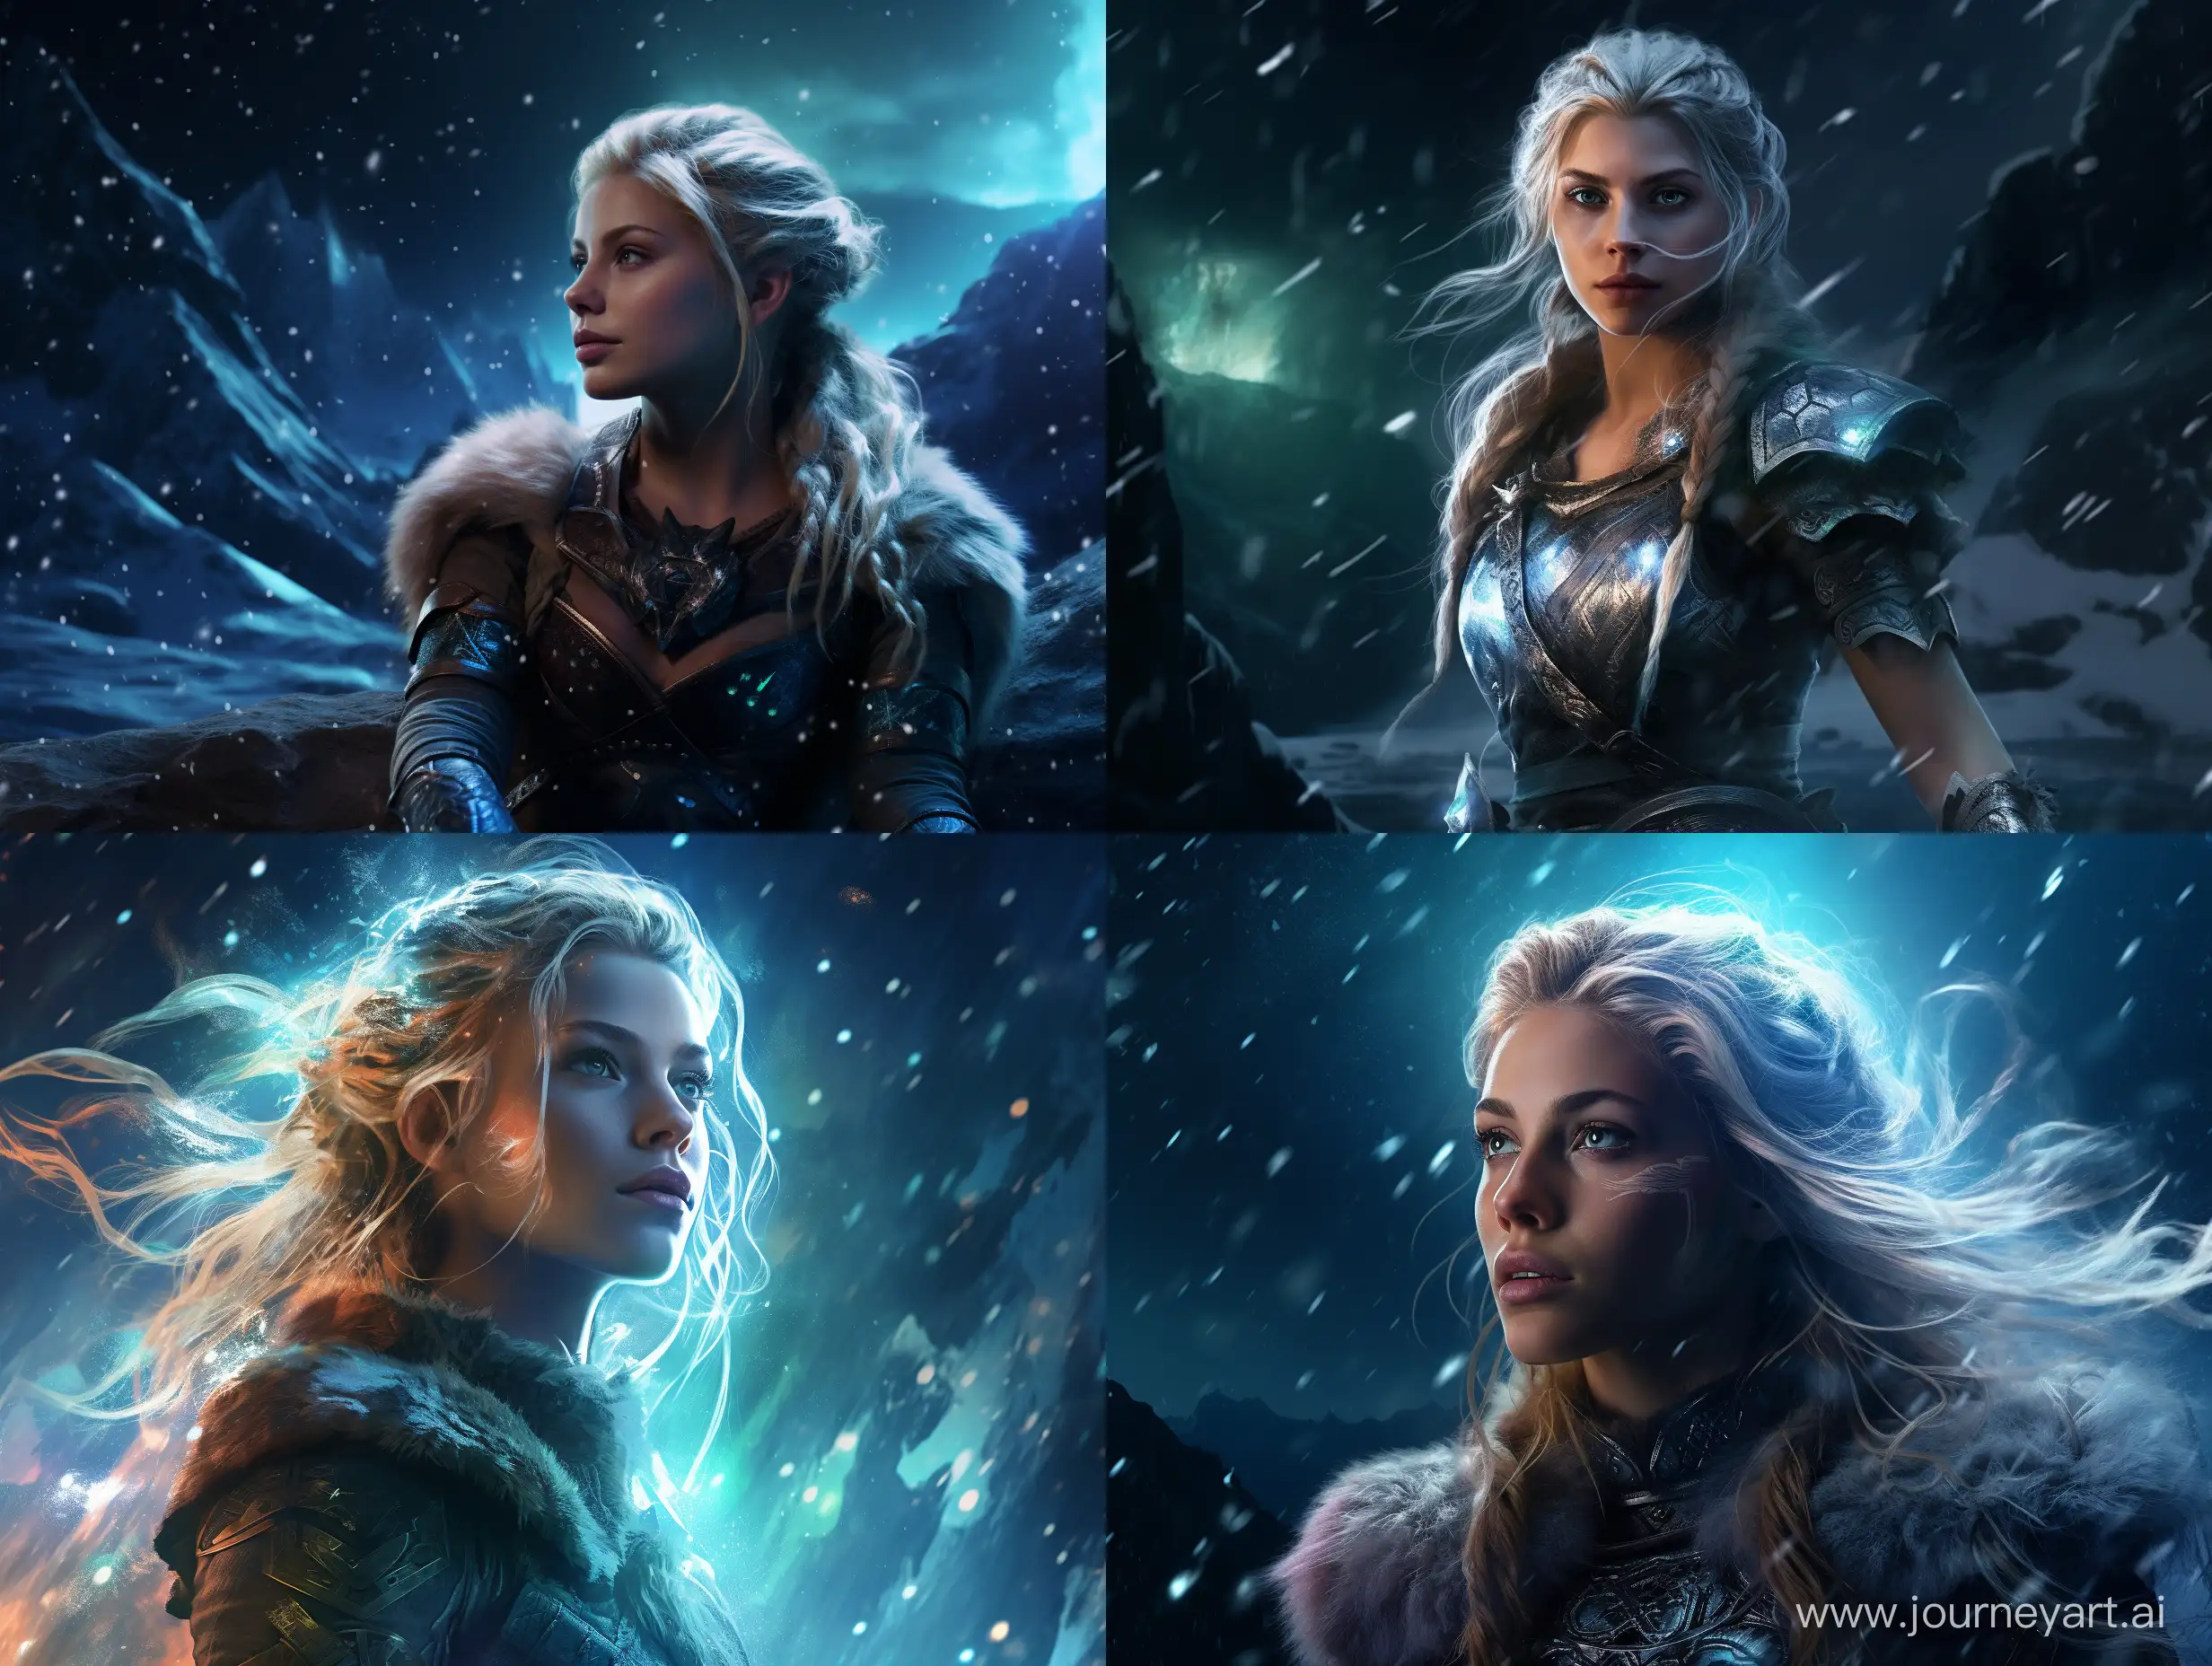 Lagertha-Viking-Girl-and-Budoair-Under-the-Northern-Lights